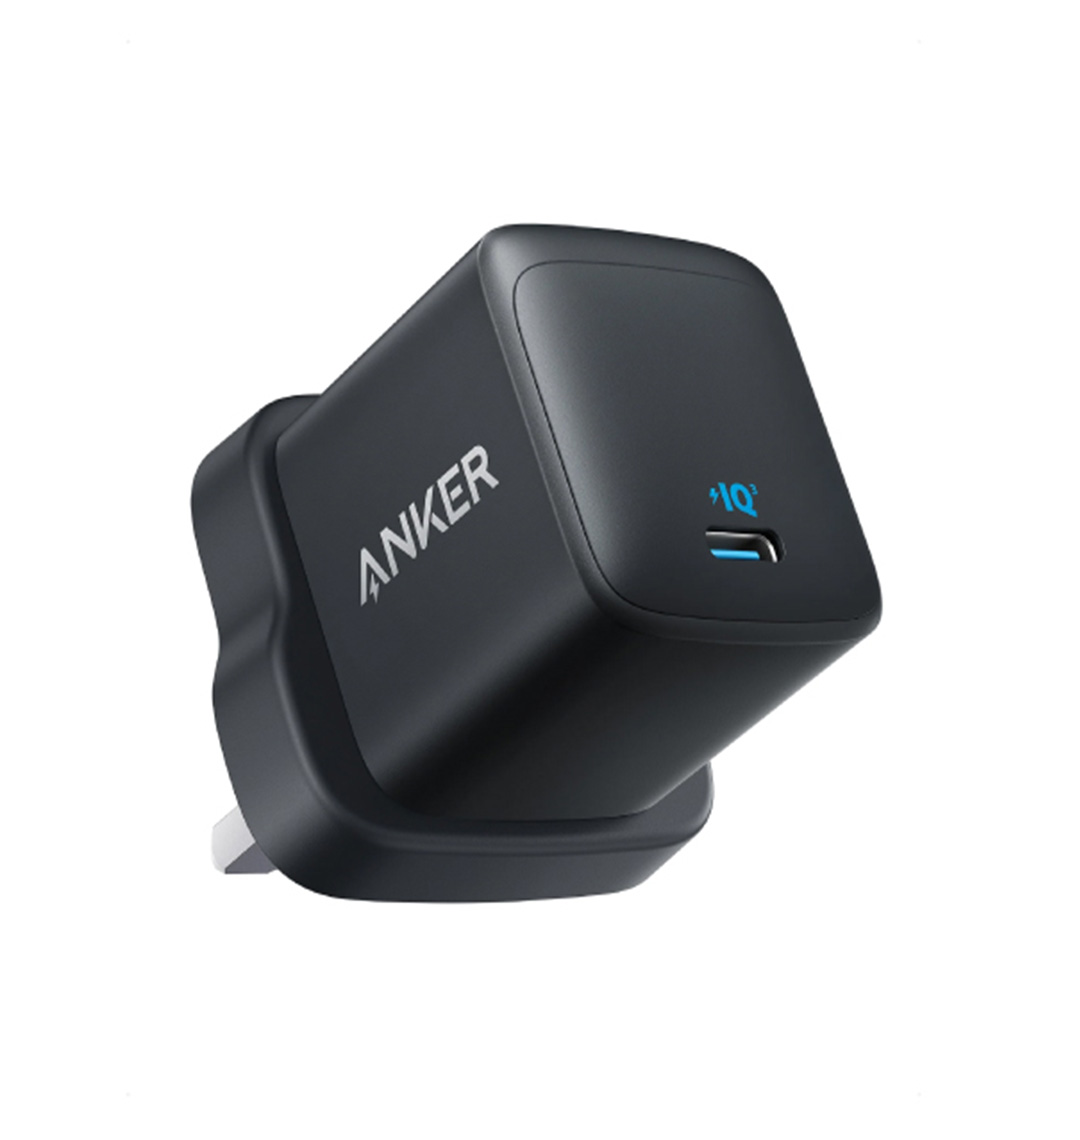 Anker 313 Charger 45W A2643K11 – Black